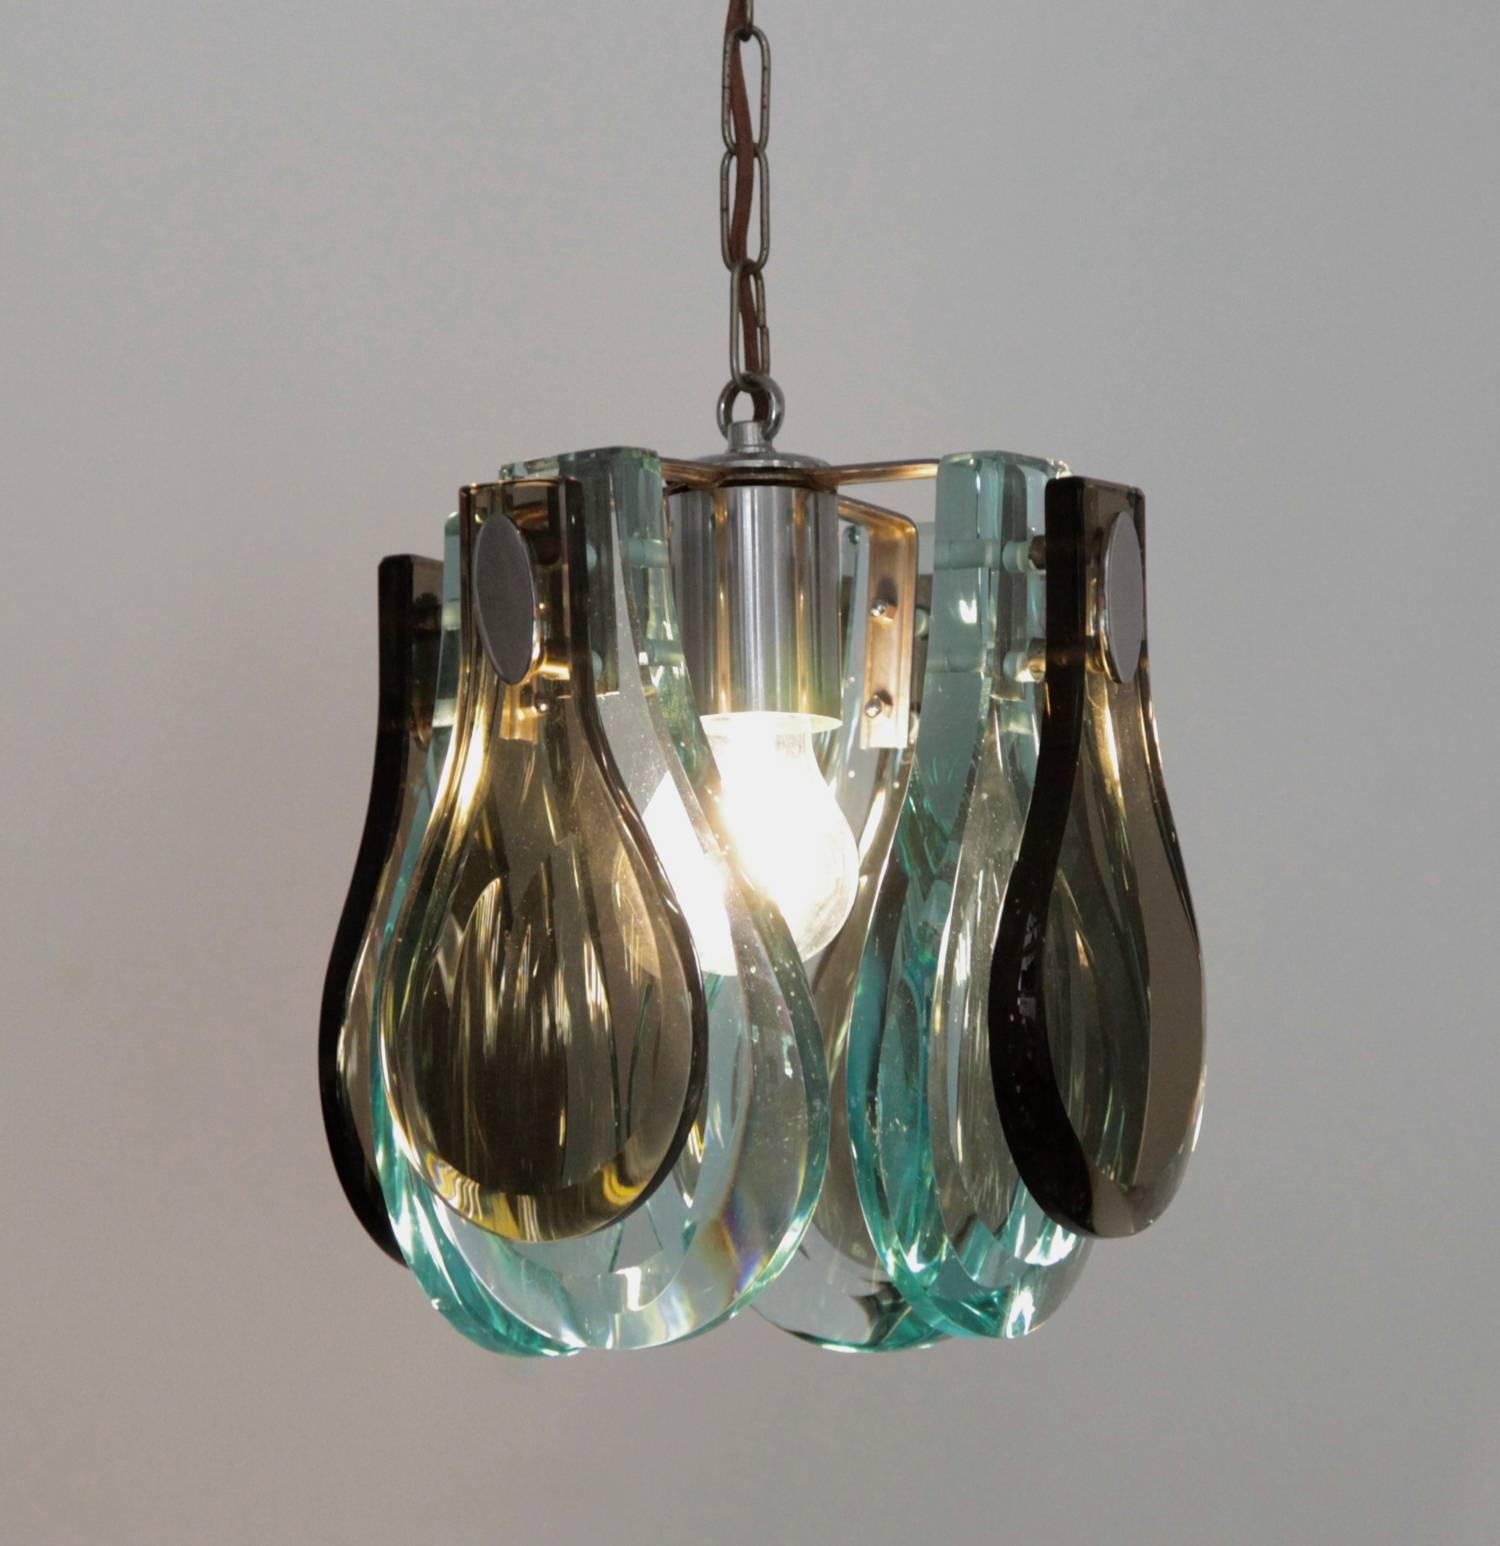 Italian Fontana Arte Style Pendant Lamp with Murano Glass in Excellent Condition